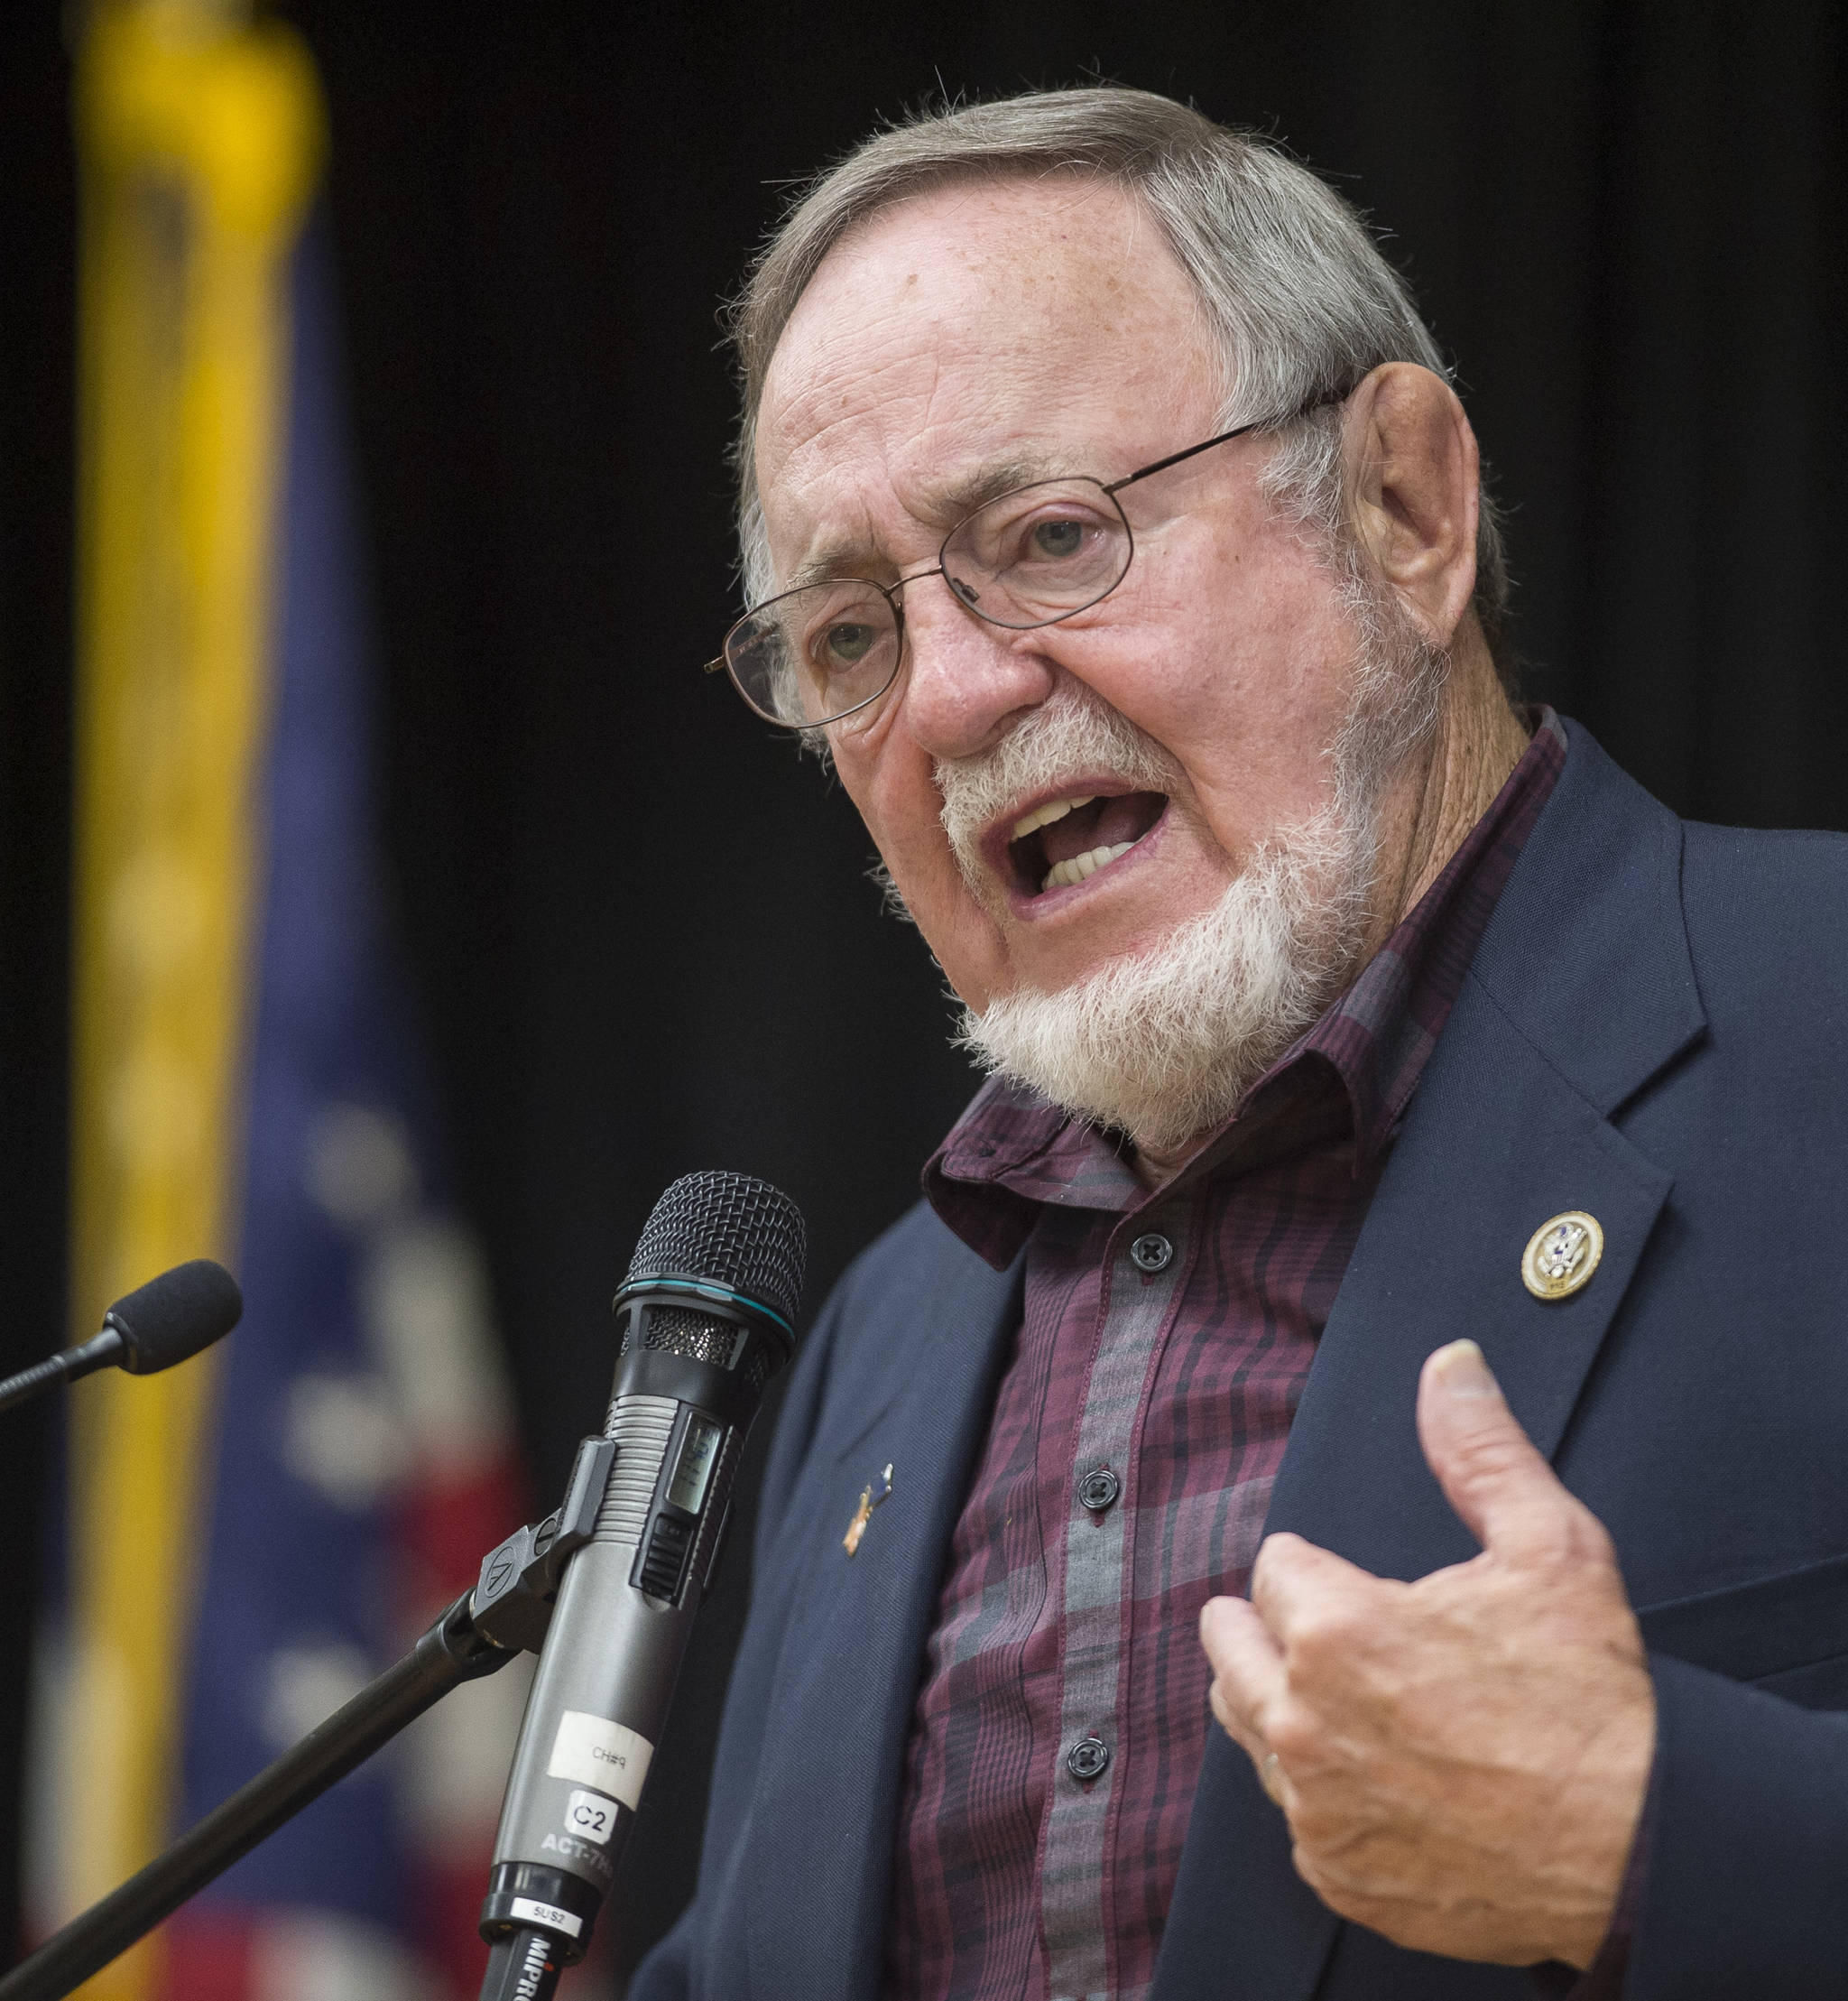 U.S. Rep. Don Young, R-Alaska, speaks at a Native Issues Forum at the Elizabeth Peratrovich Hall on Wednesday, Aug. 1, 2018. Young recently said he supported statehood for Puerto Rico. (Michael Penn / Juneau Empire)